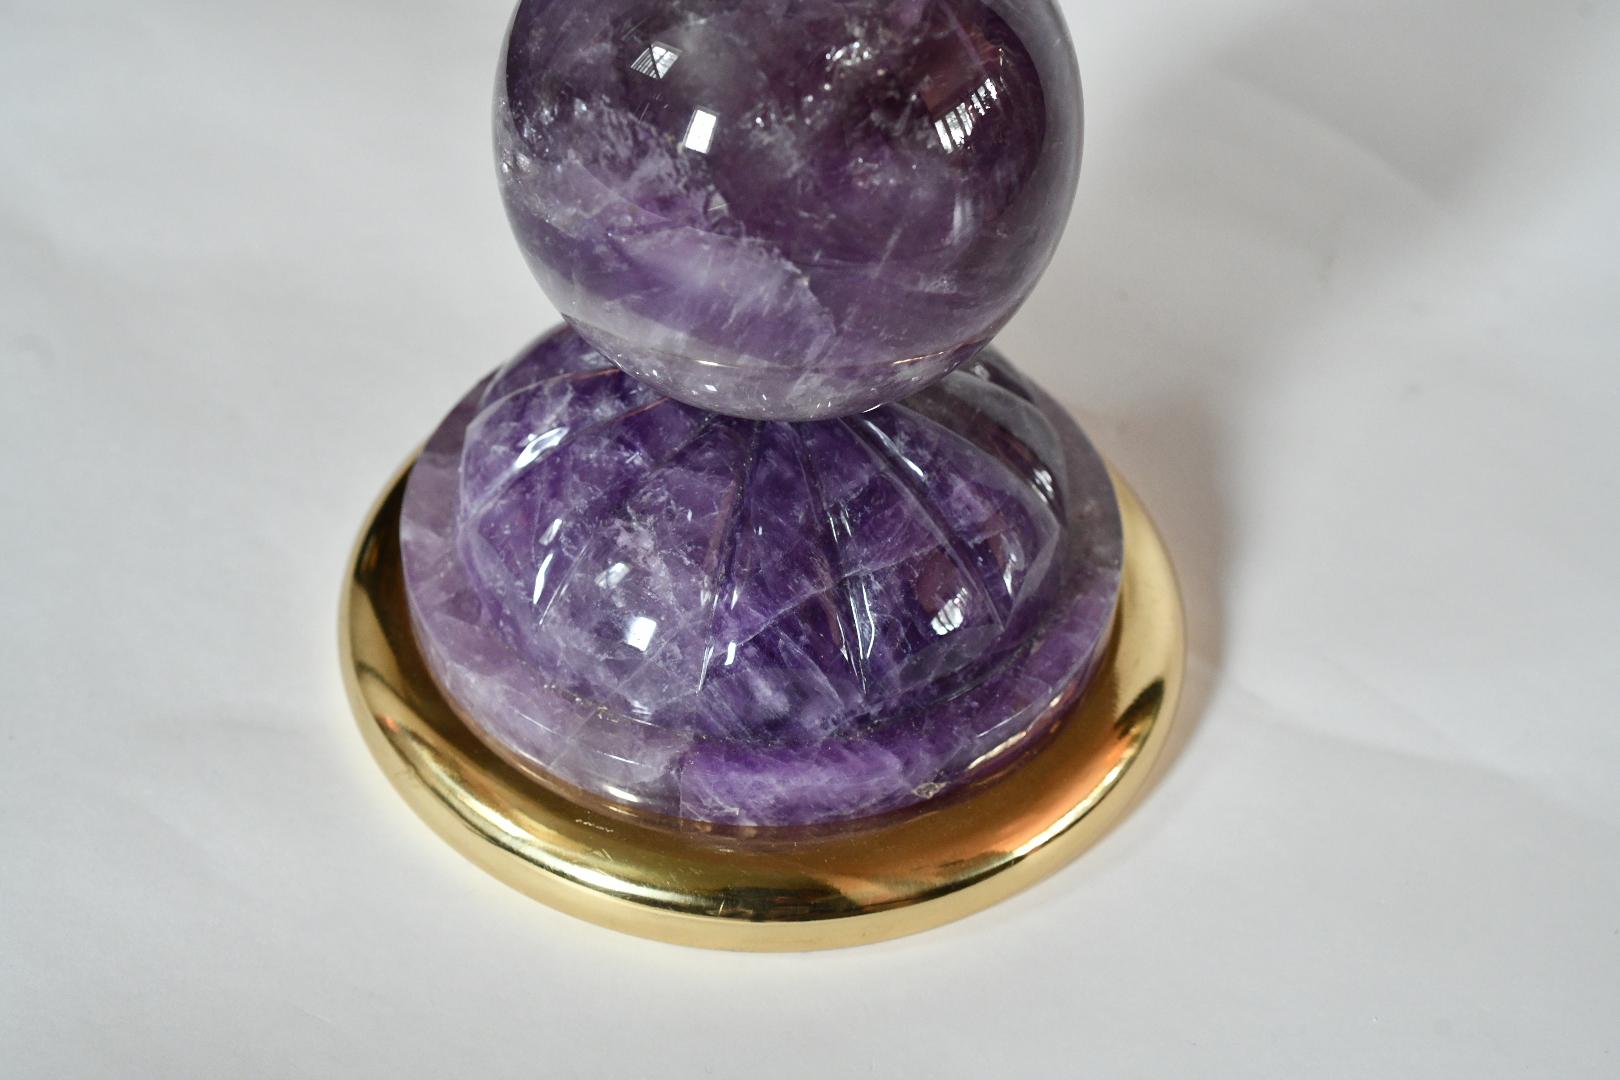 Pair of amethyst rock crystal quartz lamps with fine cast gilt brass base. Created by Phoenix Gallery NYC.
Measure: To the top of the rock crystal 22